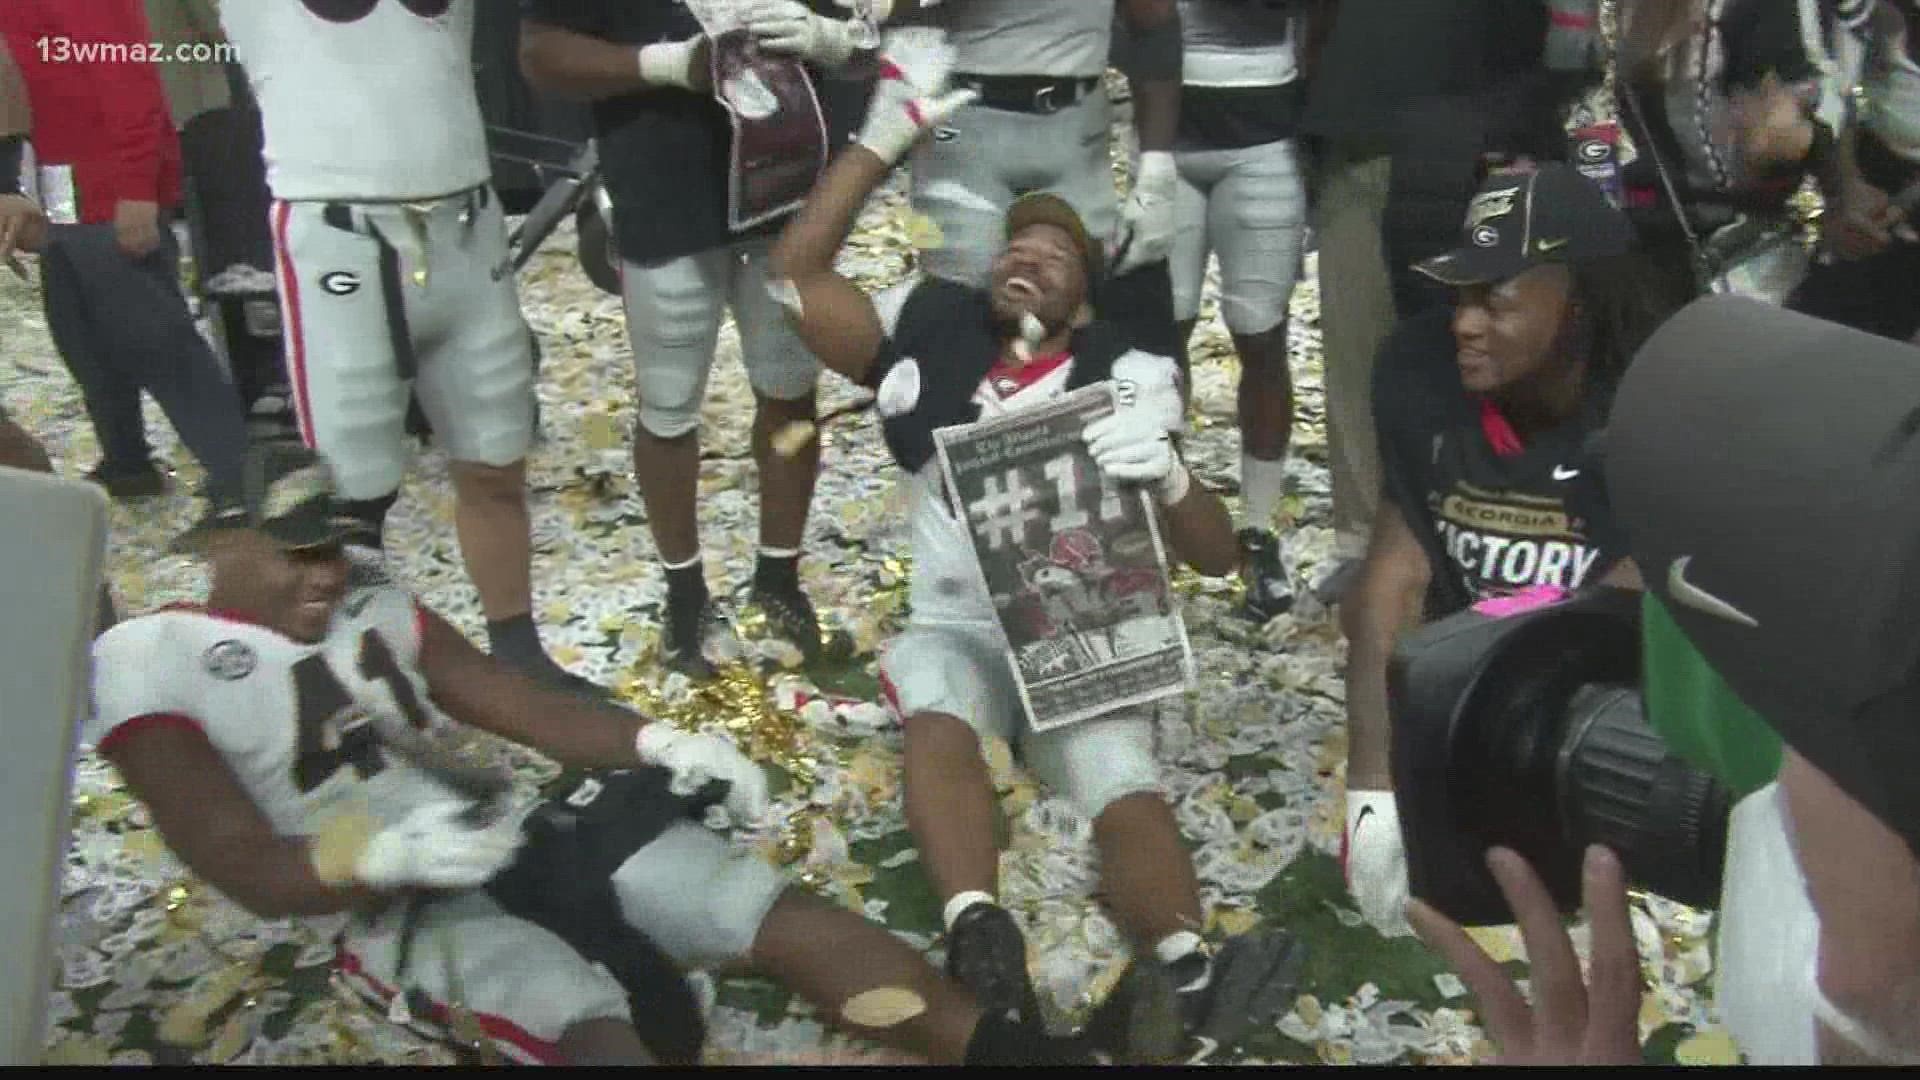 The Georgia Bulldogs claimed the national championship for the first time since 1980, and they did it in dramatic fashion by defeating the Alabama Crimson Tide.